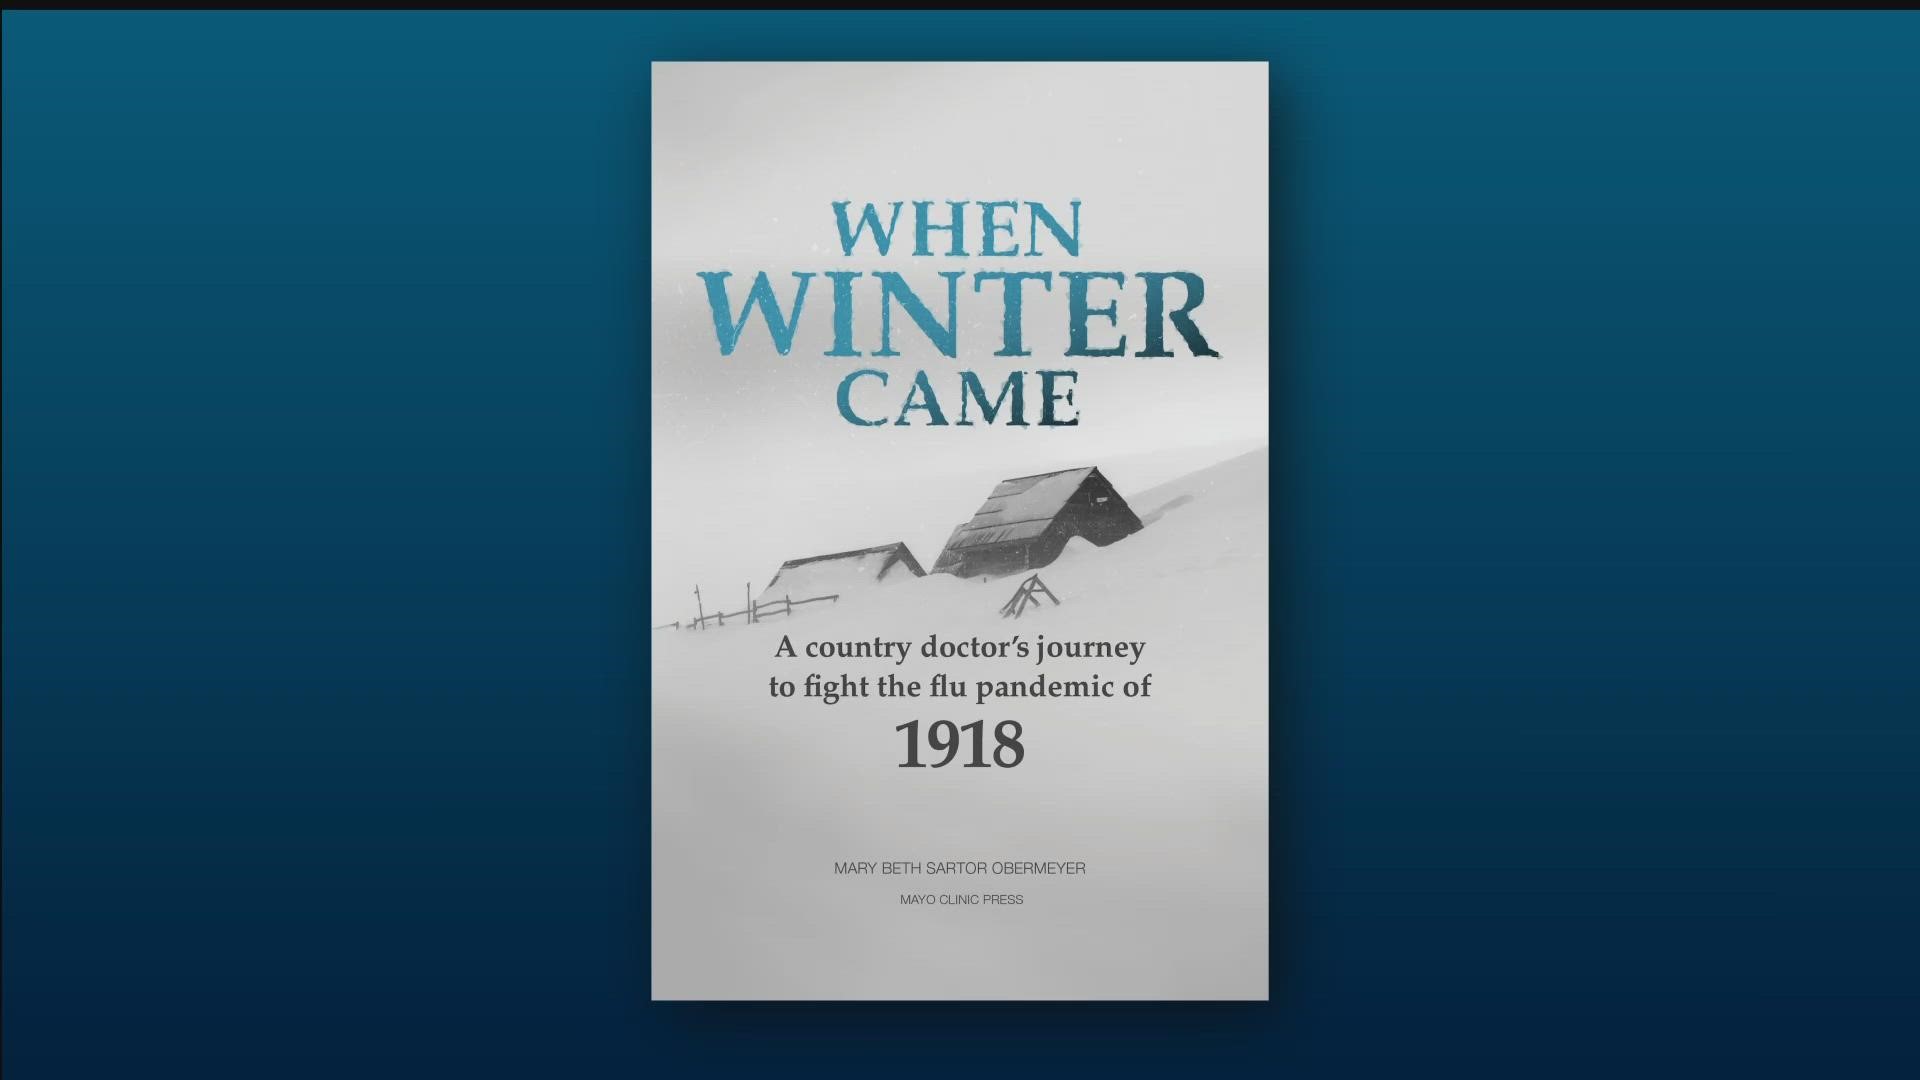 Mary Beth Santor Obermeyer's book, "When Winter Came," is based on her grandfather's account of the 1918 pandemic.